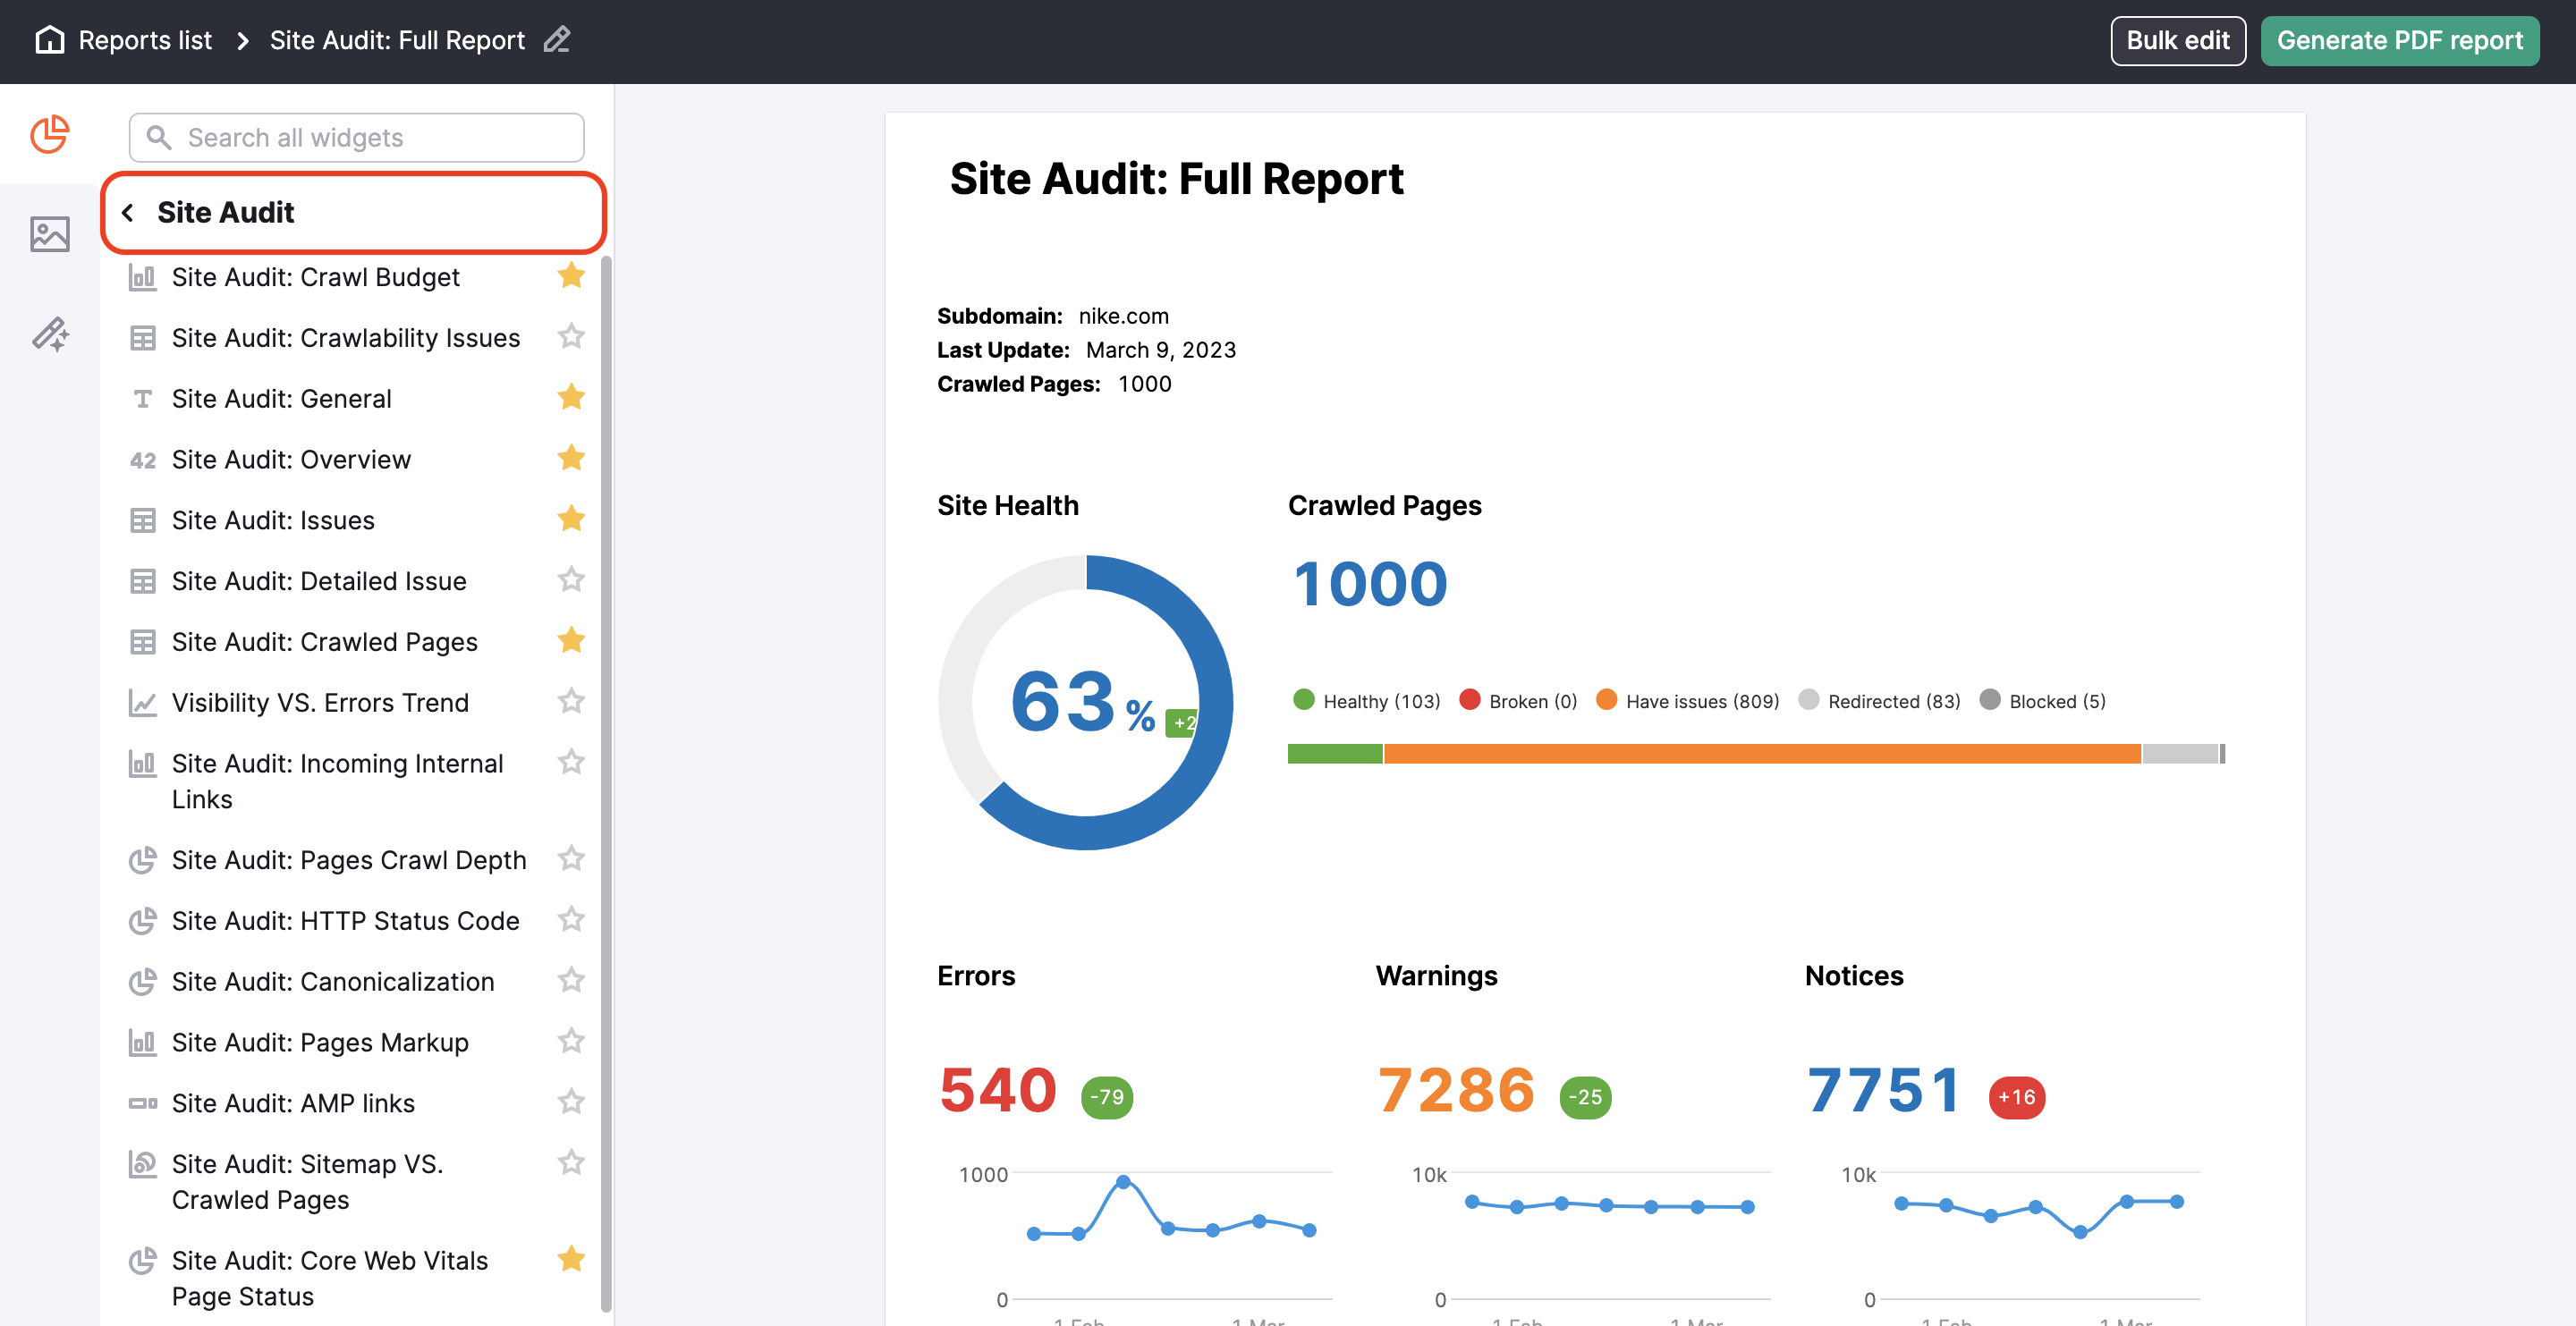 Site Audit widgets in My Reports